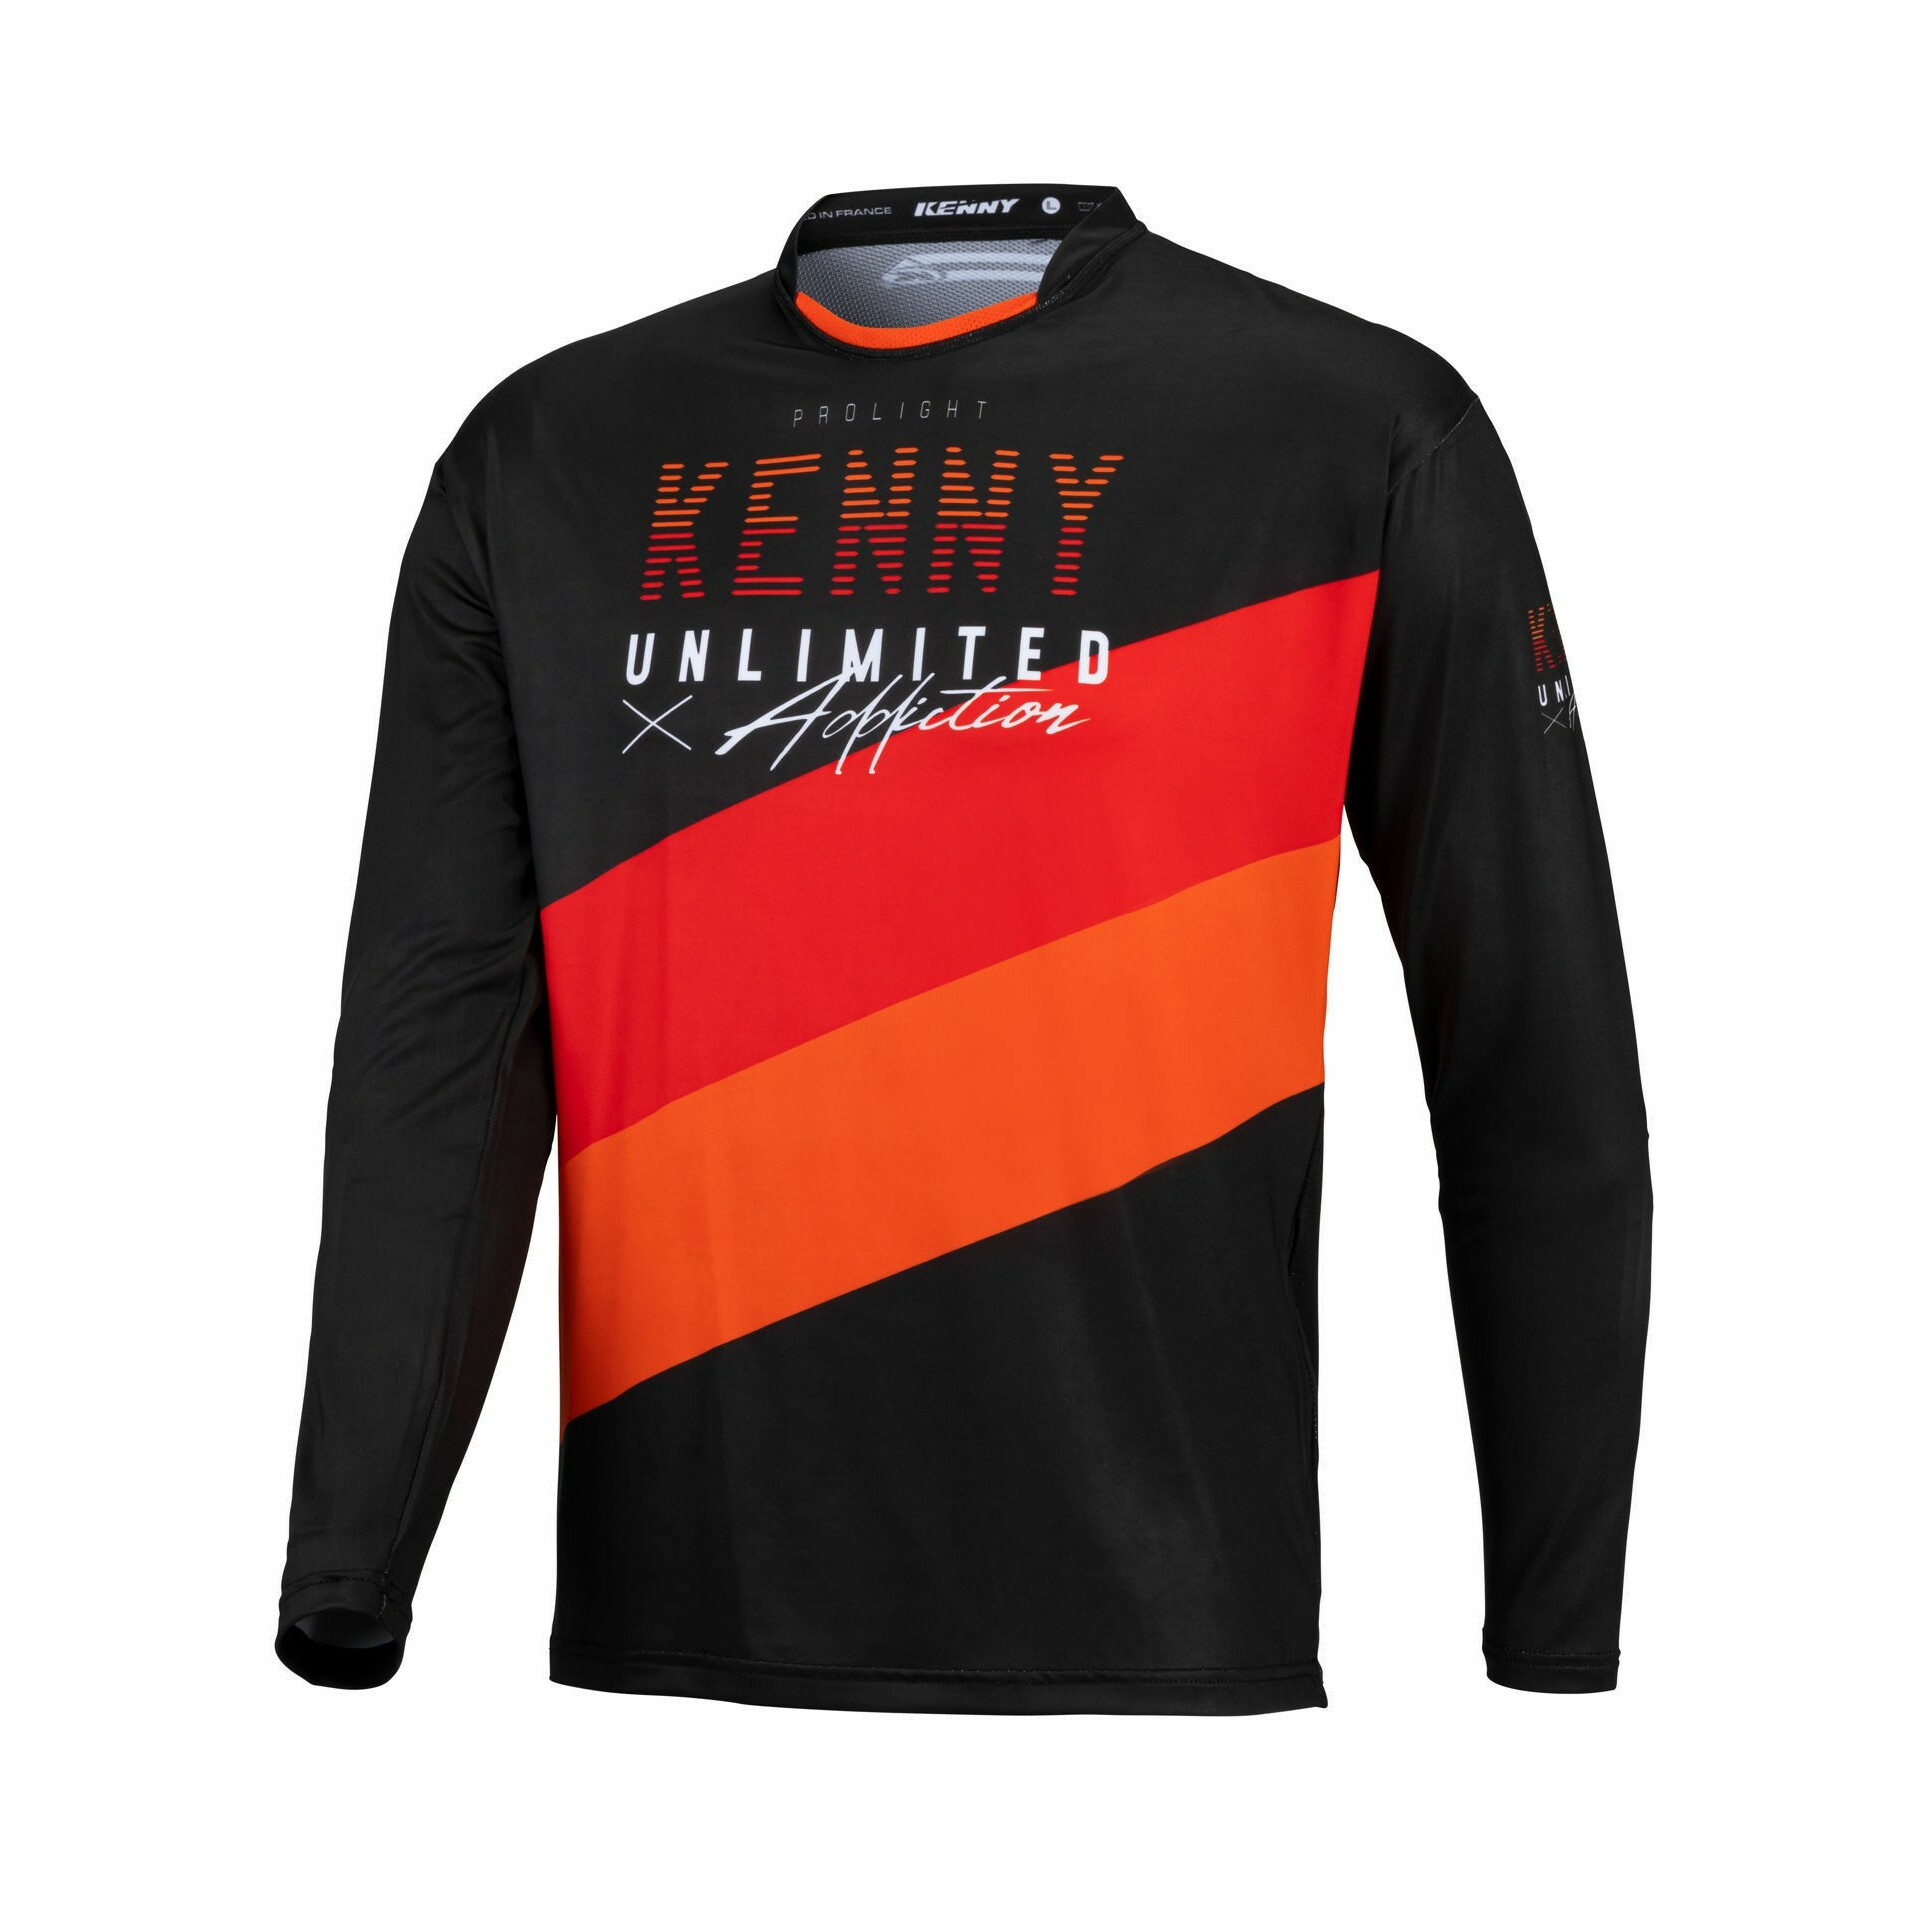 Maillot manches longues Kenny ProLight